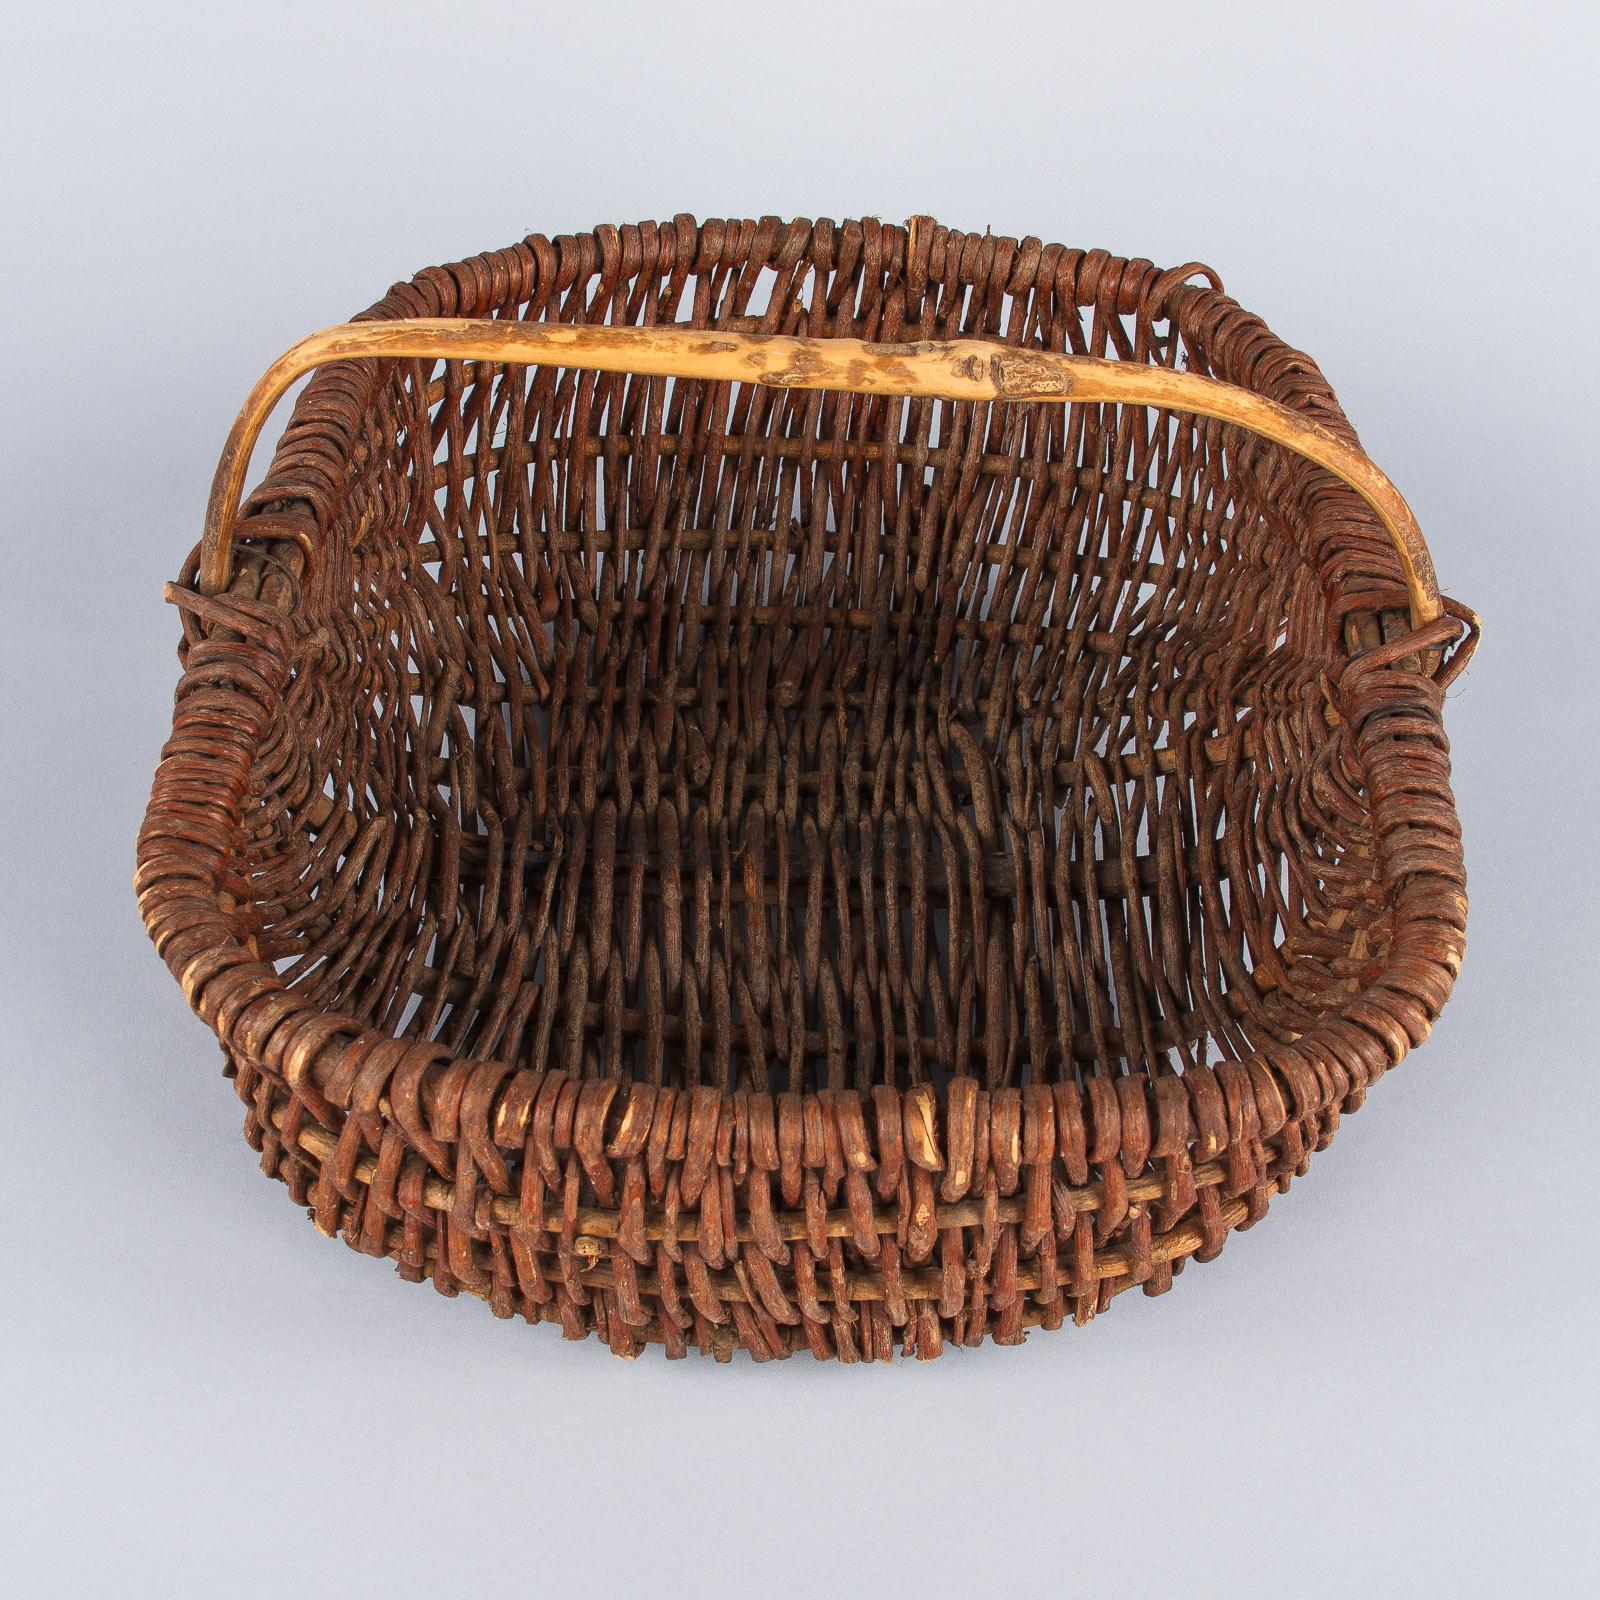 French Provincial French Wicker Basket from Auvergne Region, 20th Century